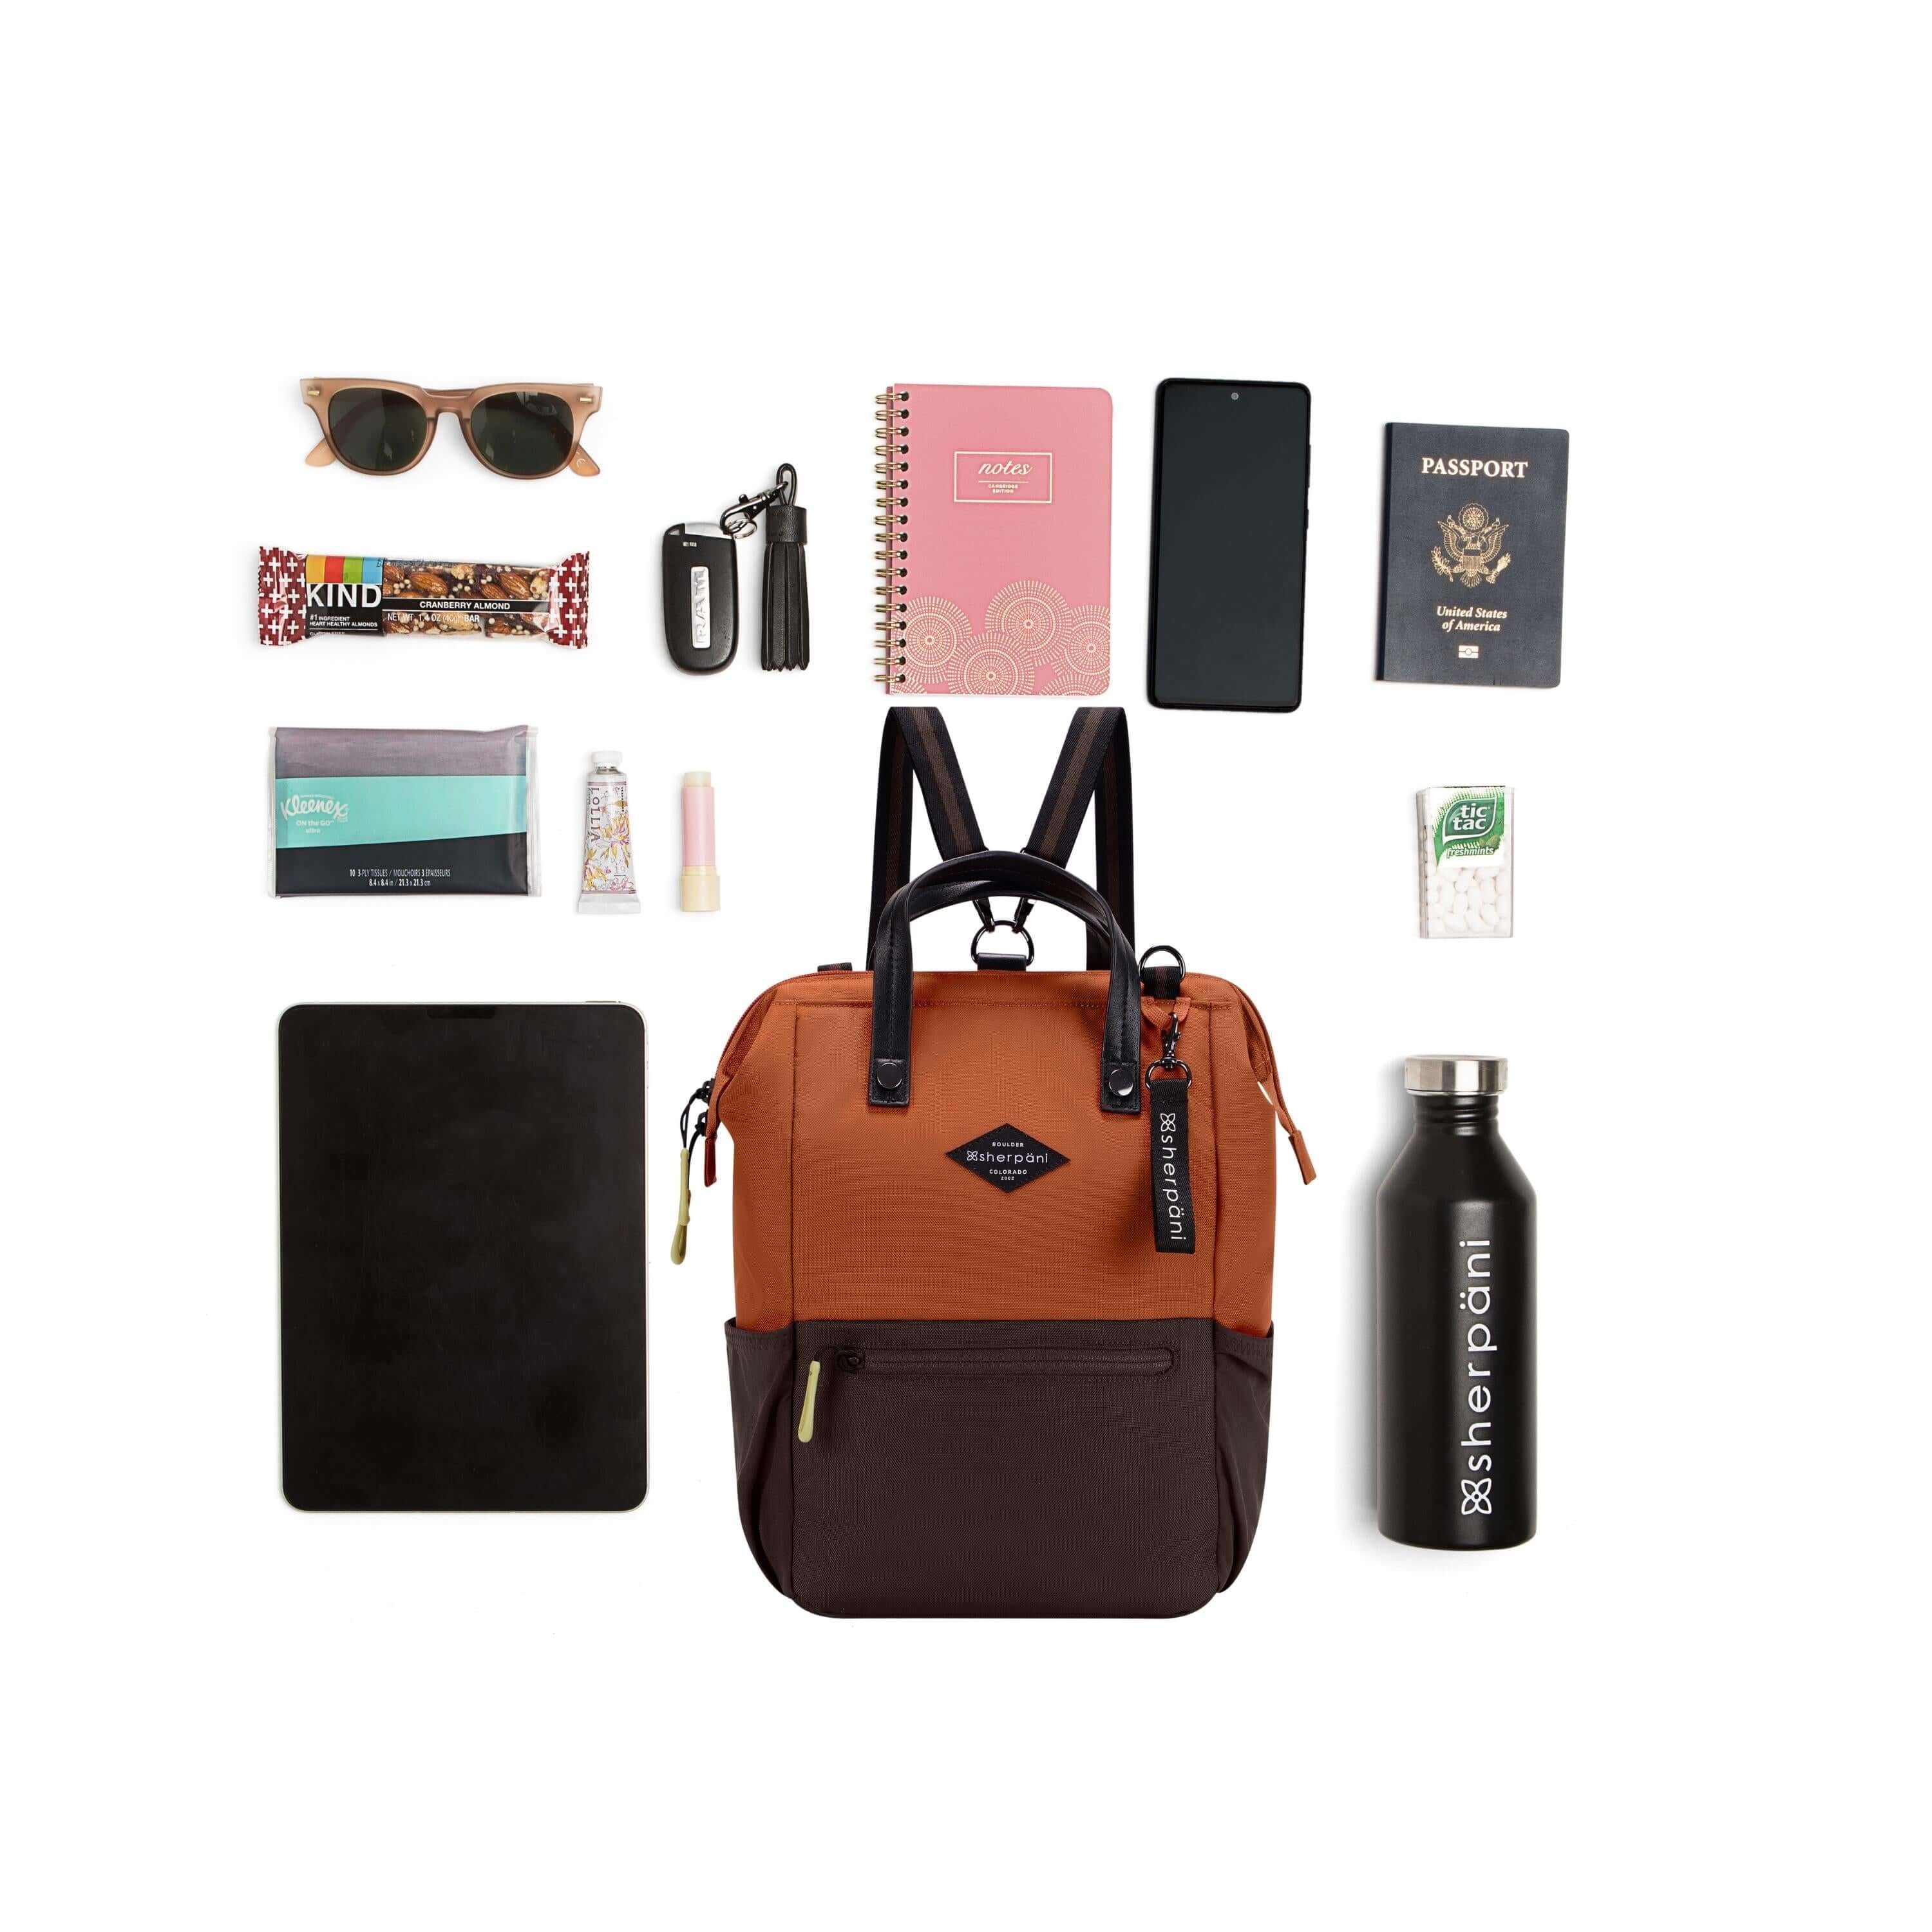 Top view of example items to fill the bag. Sherpani three-in-one bag, the Dispatch in Clay, lies in the center. It is surrounded by an assortment of items: sunglasses, granola bar, tissues, tablet, hand lotion, lip balm, car key, notebook, phone, passport, mints and water bottle. 